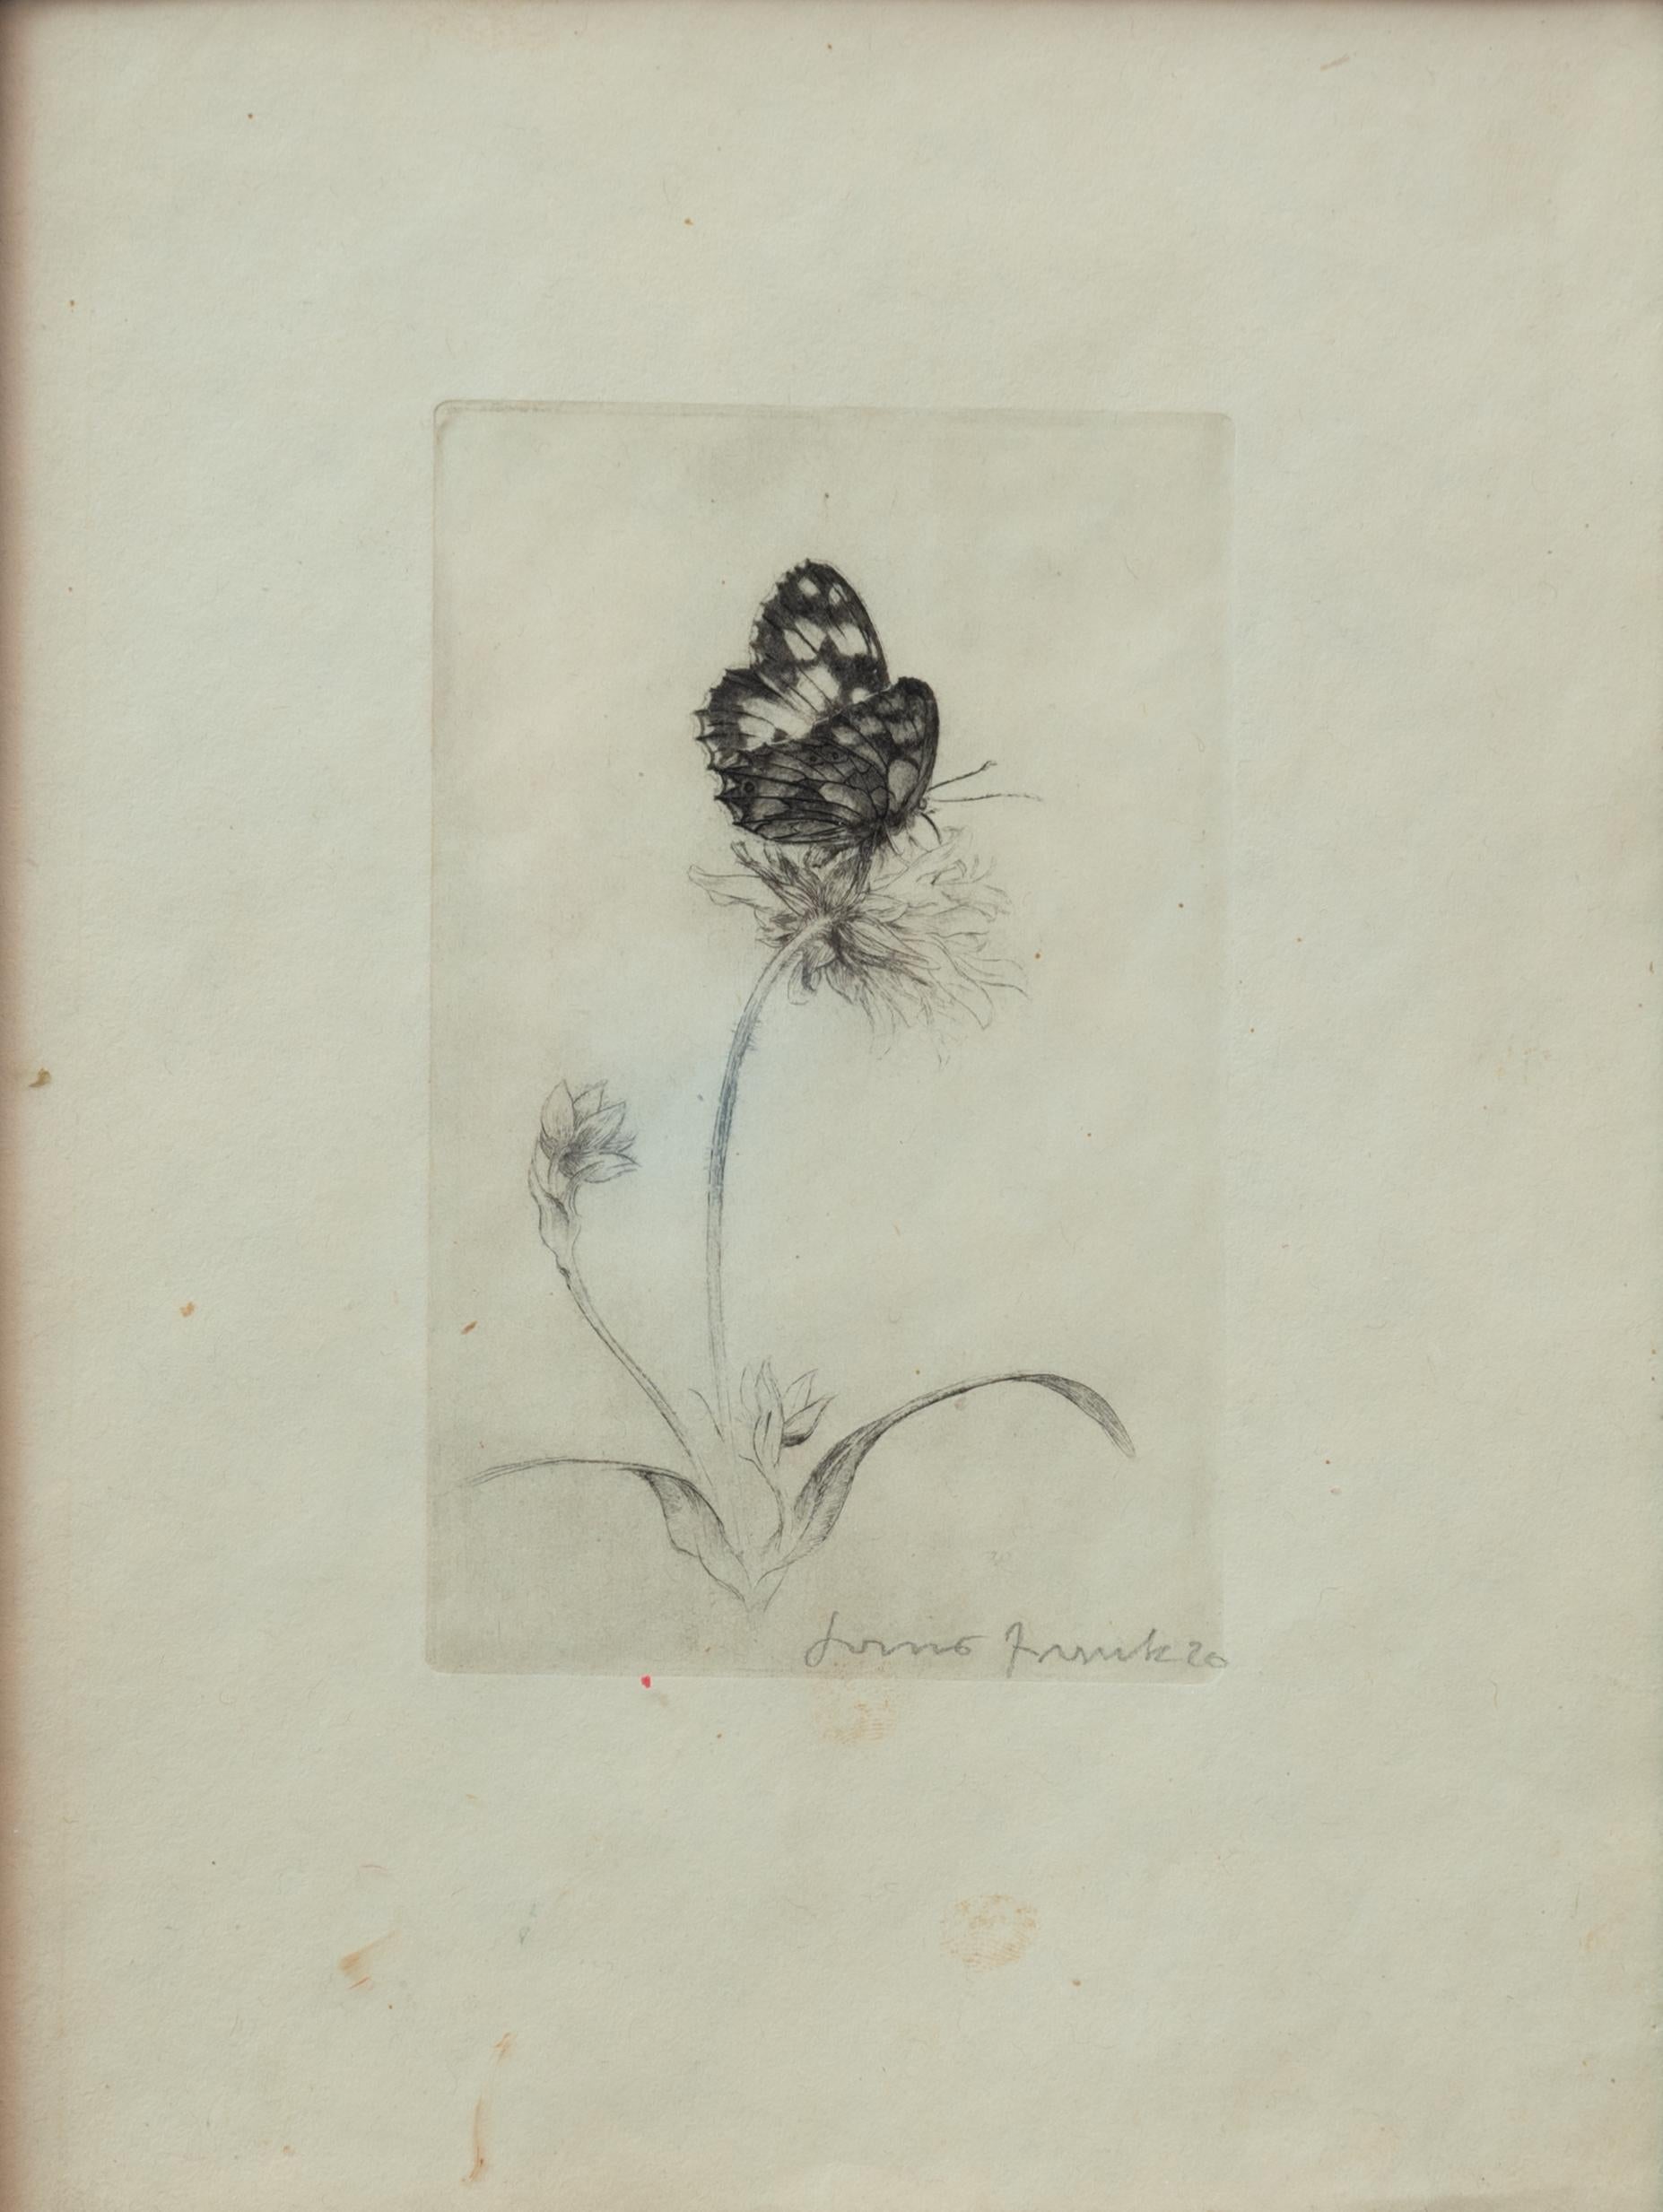 Beautiful, evocative Pencil Drawing 
Still Life with Flowers and Butterfly 
Early 20th century 
Signed at lower right
The painting is embellished by a beautiful nineteenth-century lacquered and gilded frame

Every item of our Gallery, upon request,